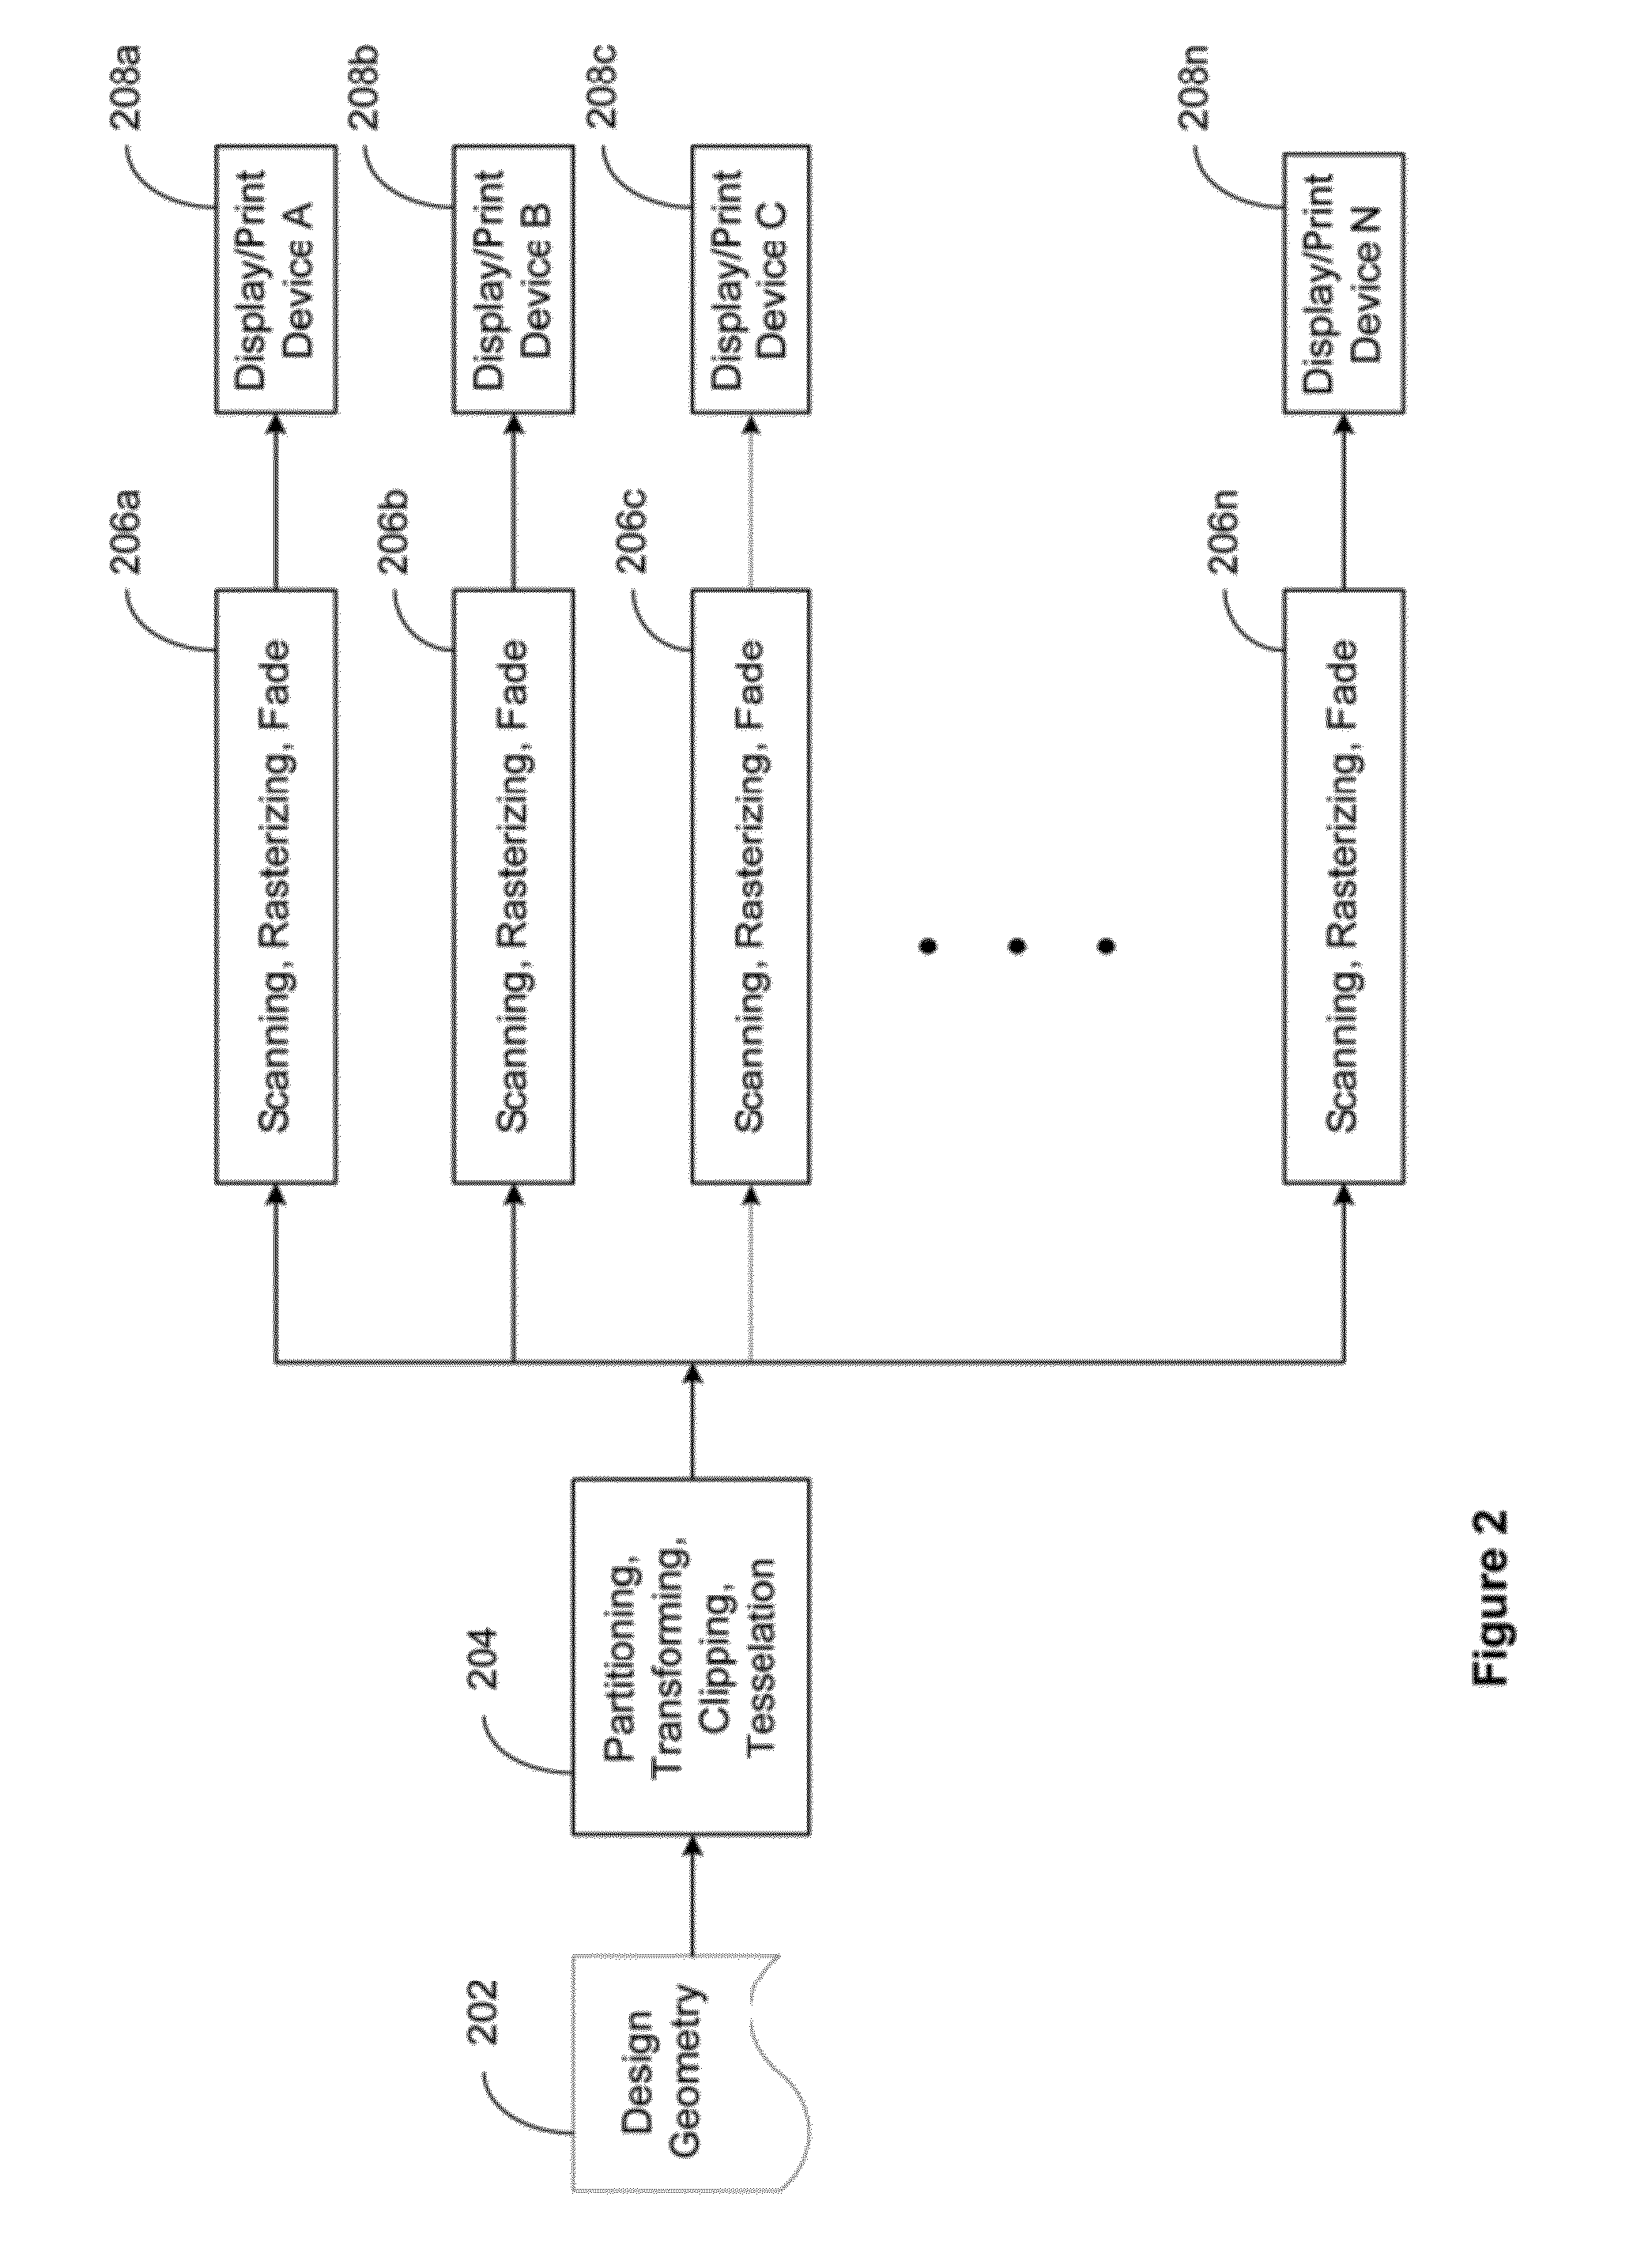 Parallel Image Processing System